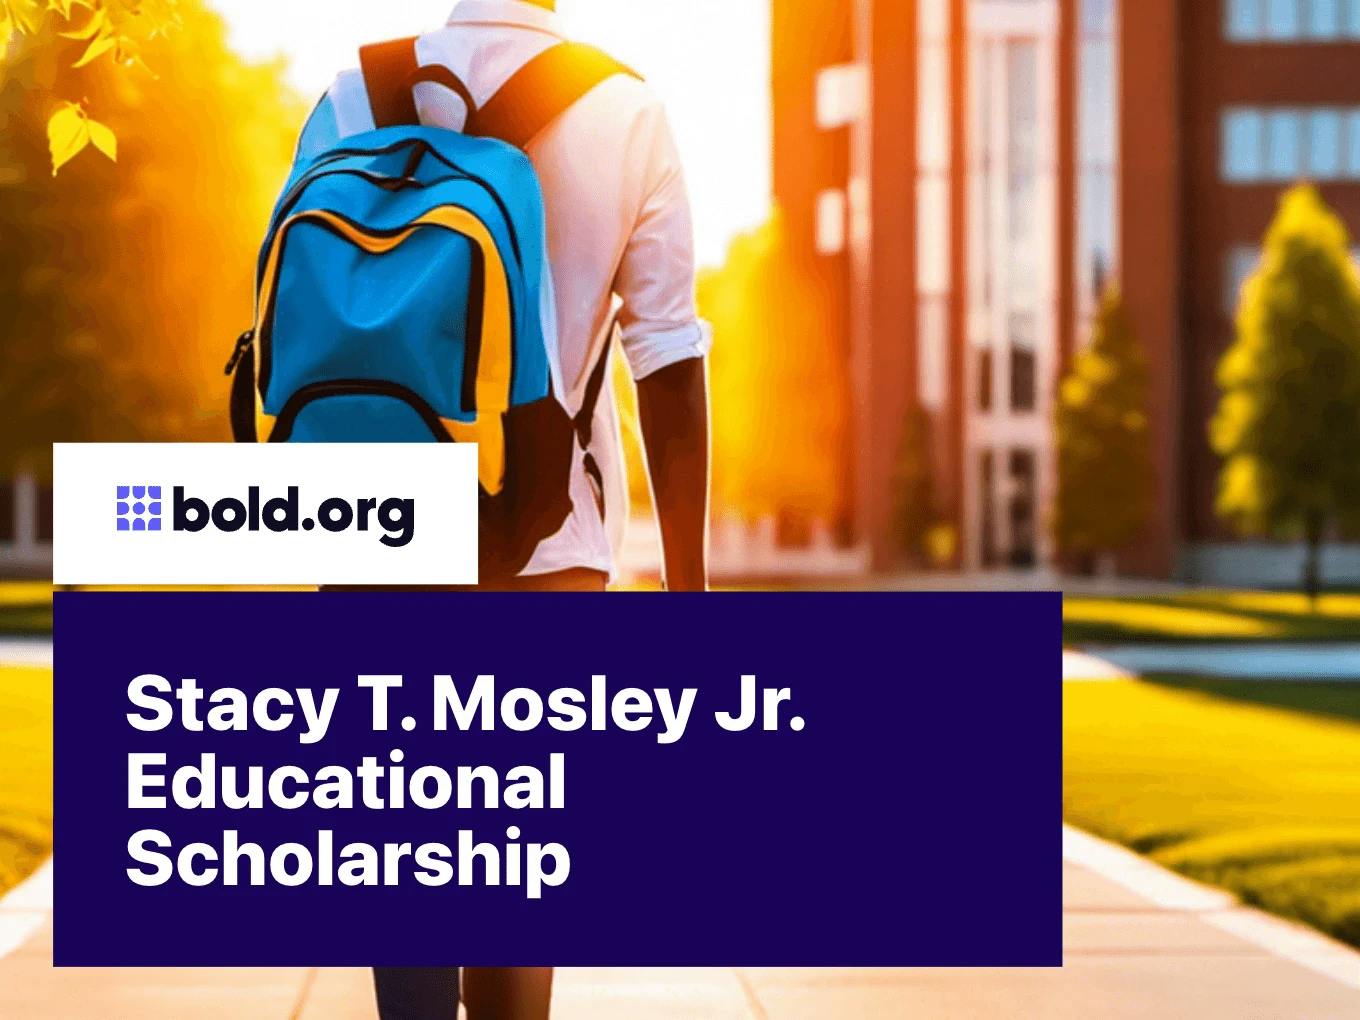 Stacy T. Mosley Jr. Educational Scholarship